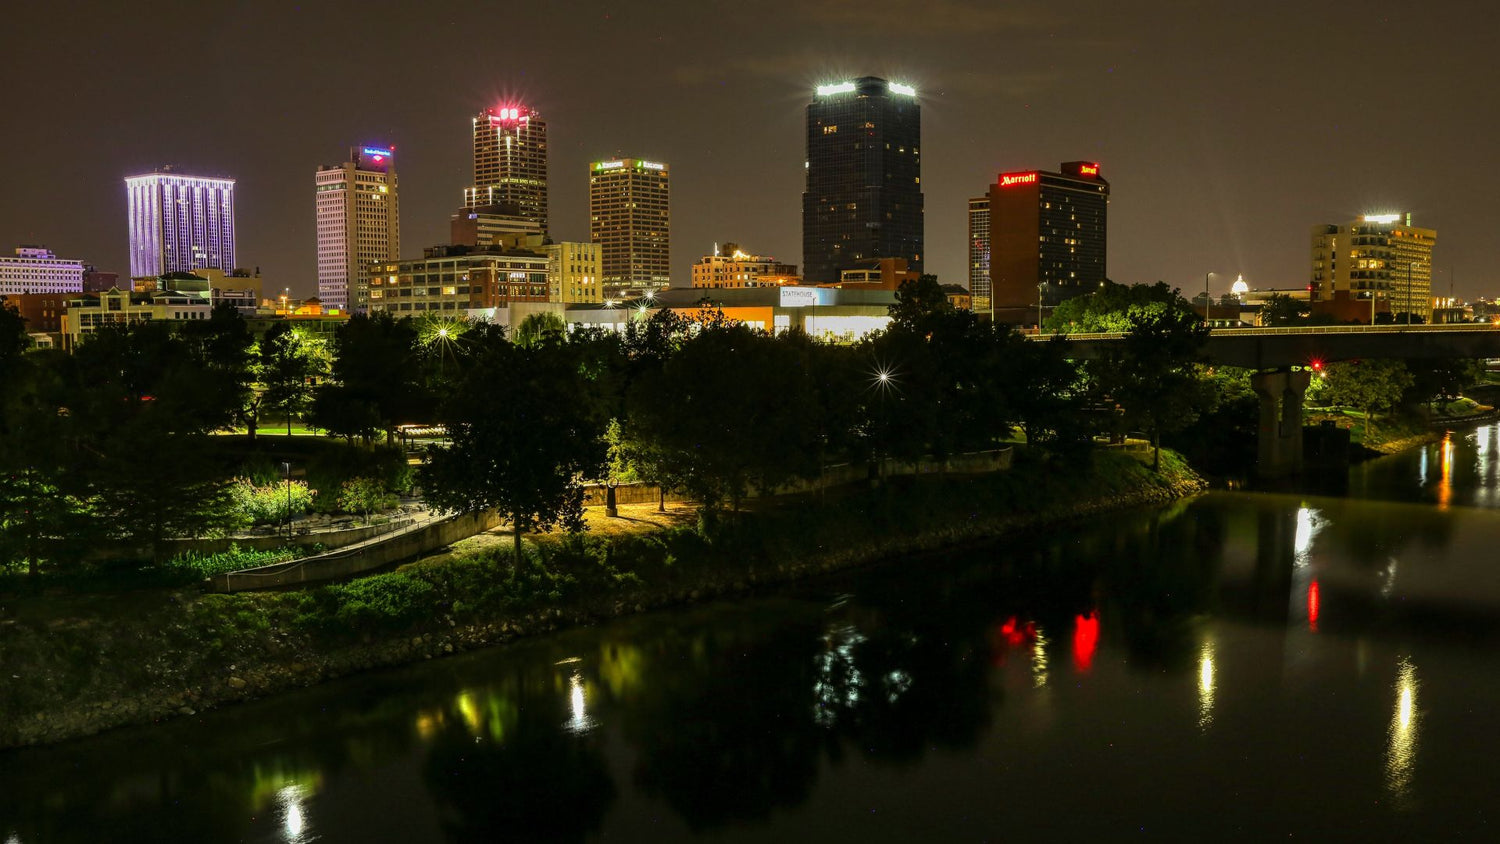 Little Rock skyline at night. - History By Mail